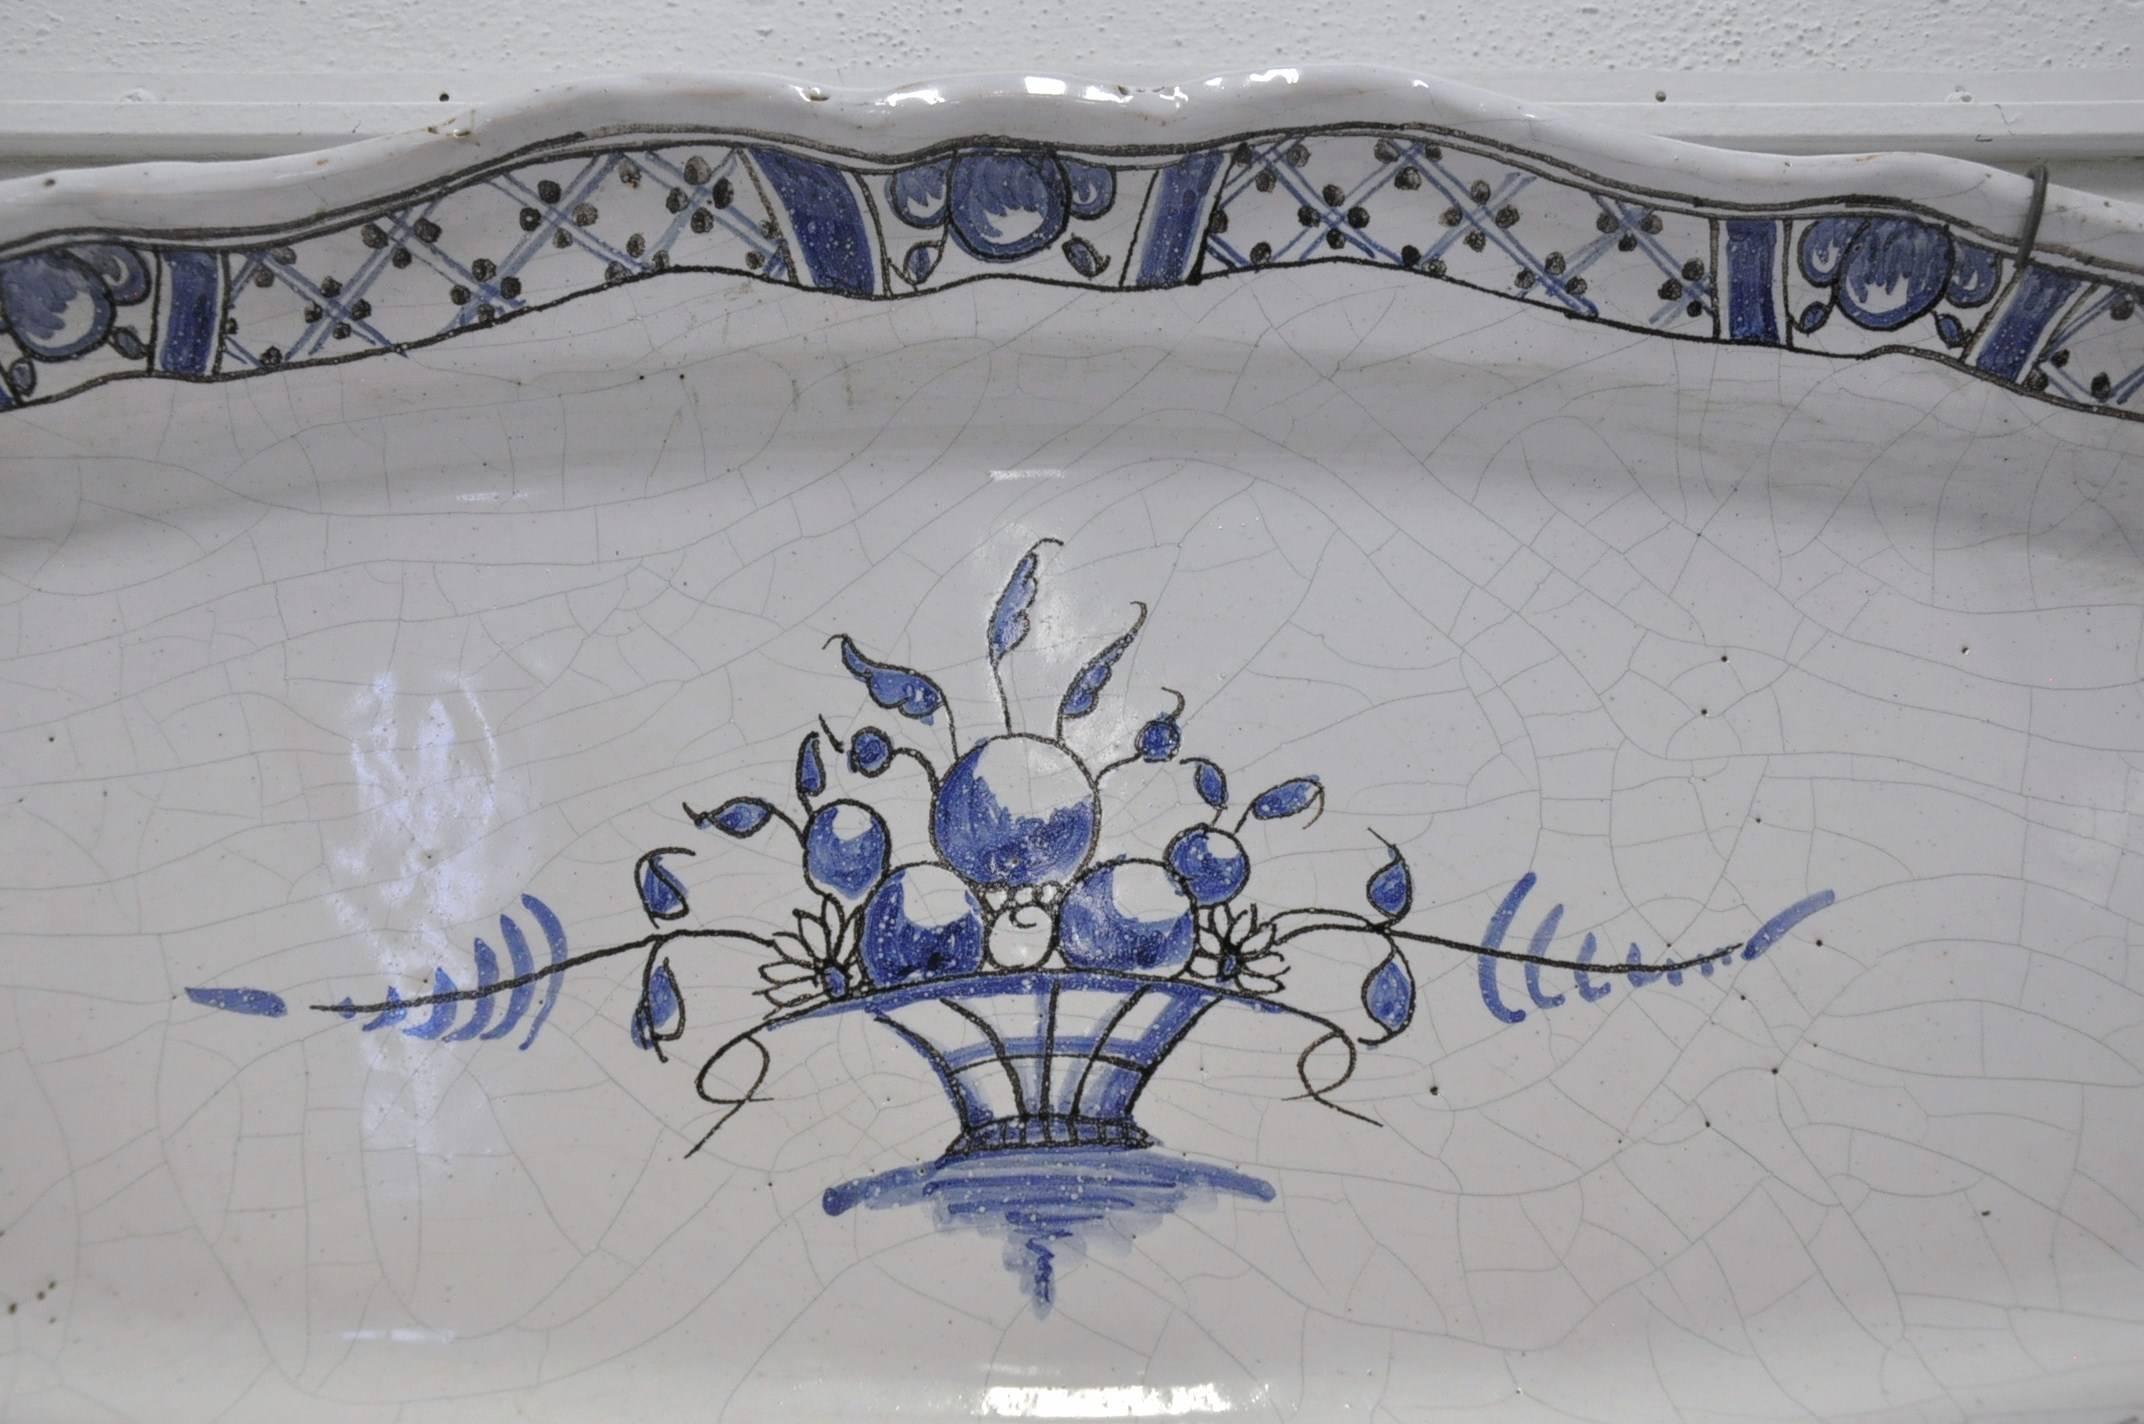 This large, antique, hand-painted platter was sculpted in Normandy, circa 1880. The oblong platter has a beautiful, Classic palette of blue and white, and has its original wall hanging hardware. At the center of the platter is a basket motif filled